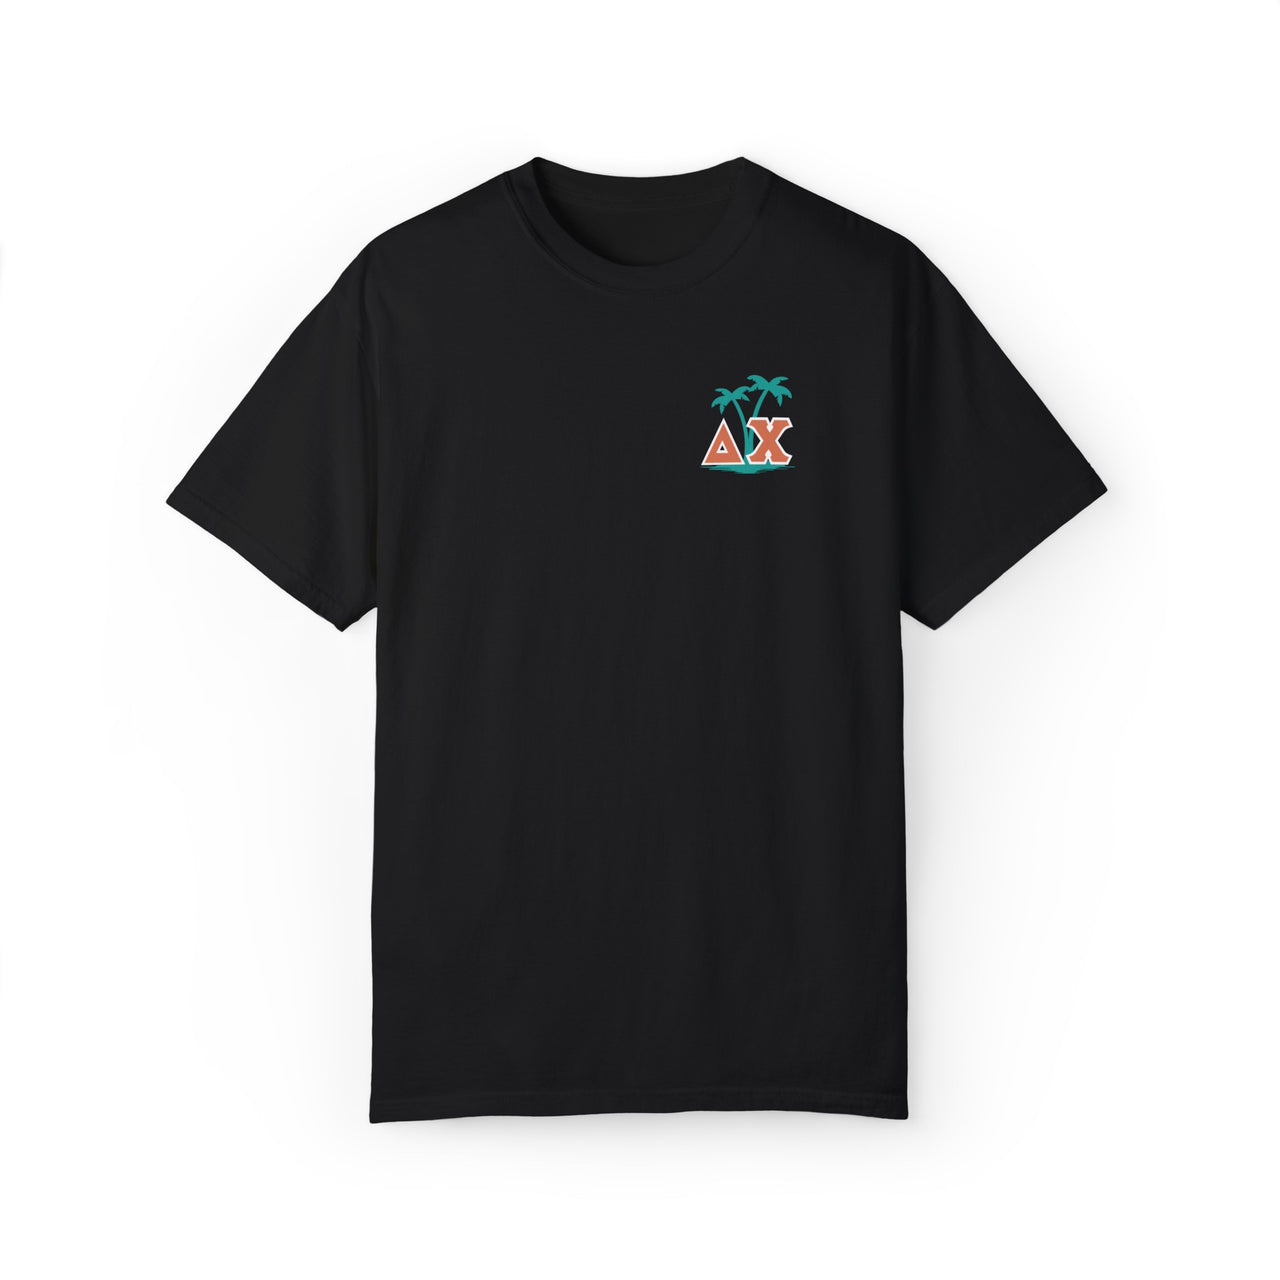 Delta Chi Graphic T-Shirt | Welcome to Paradise